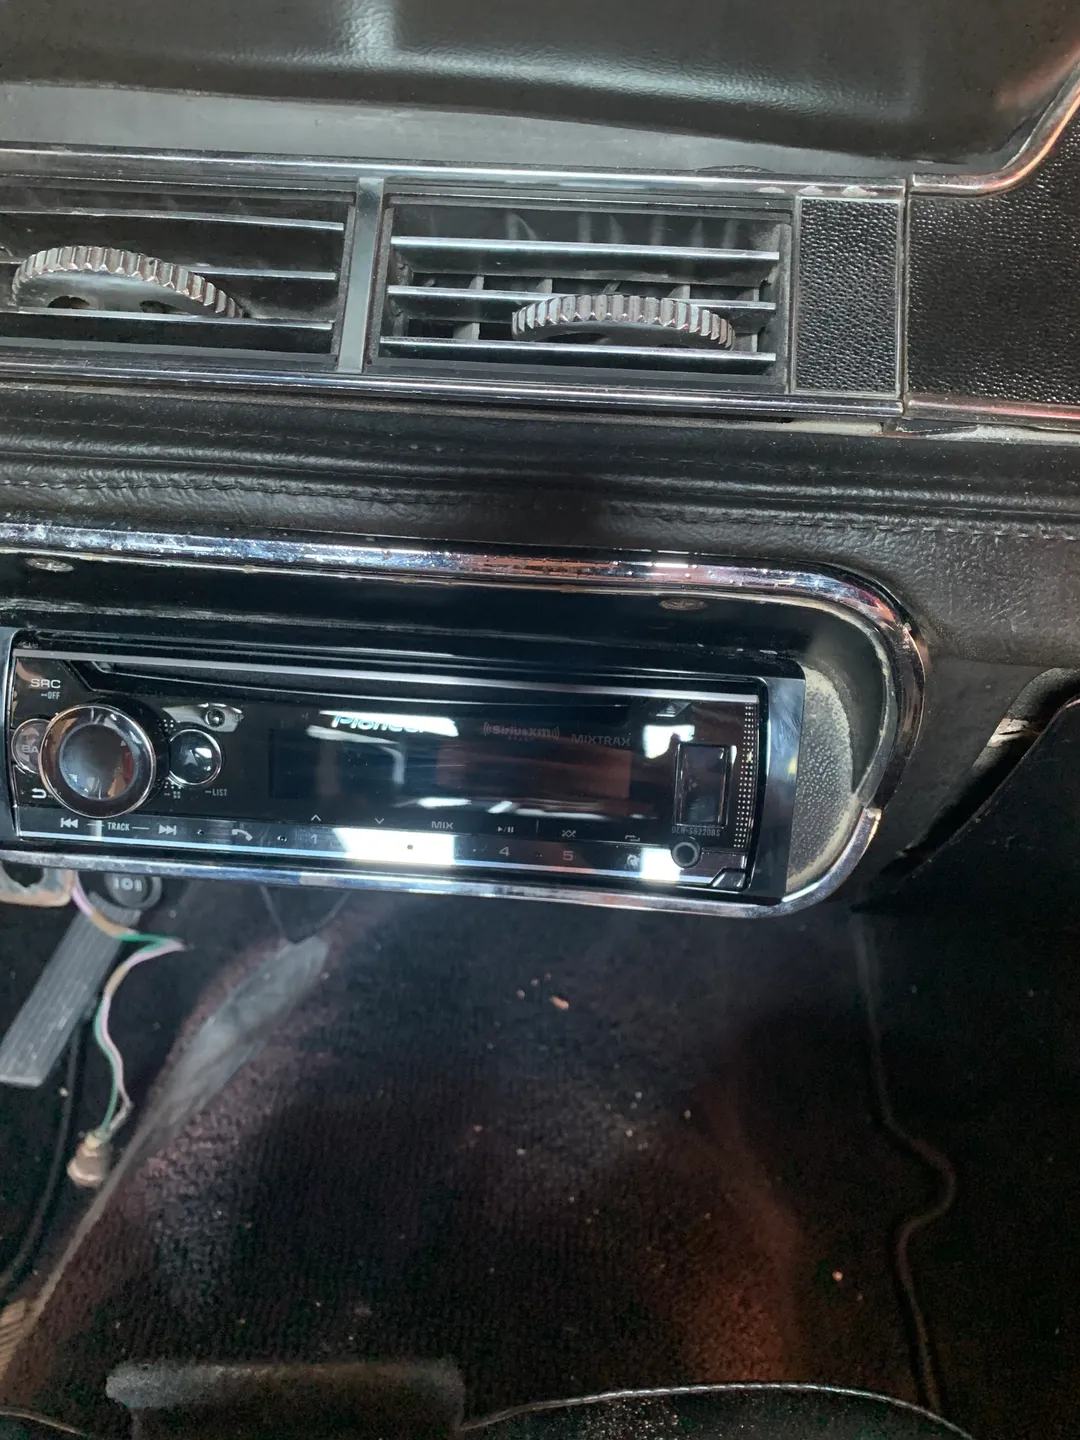 The stereo system of a vintage car